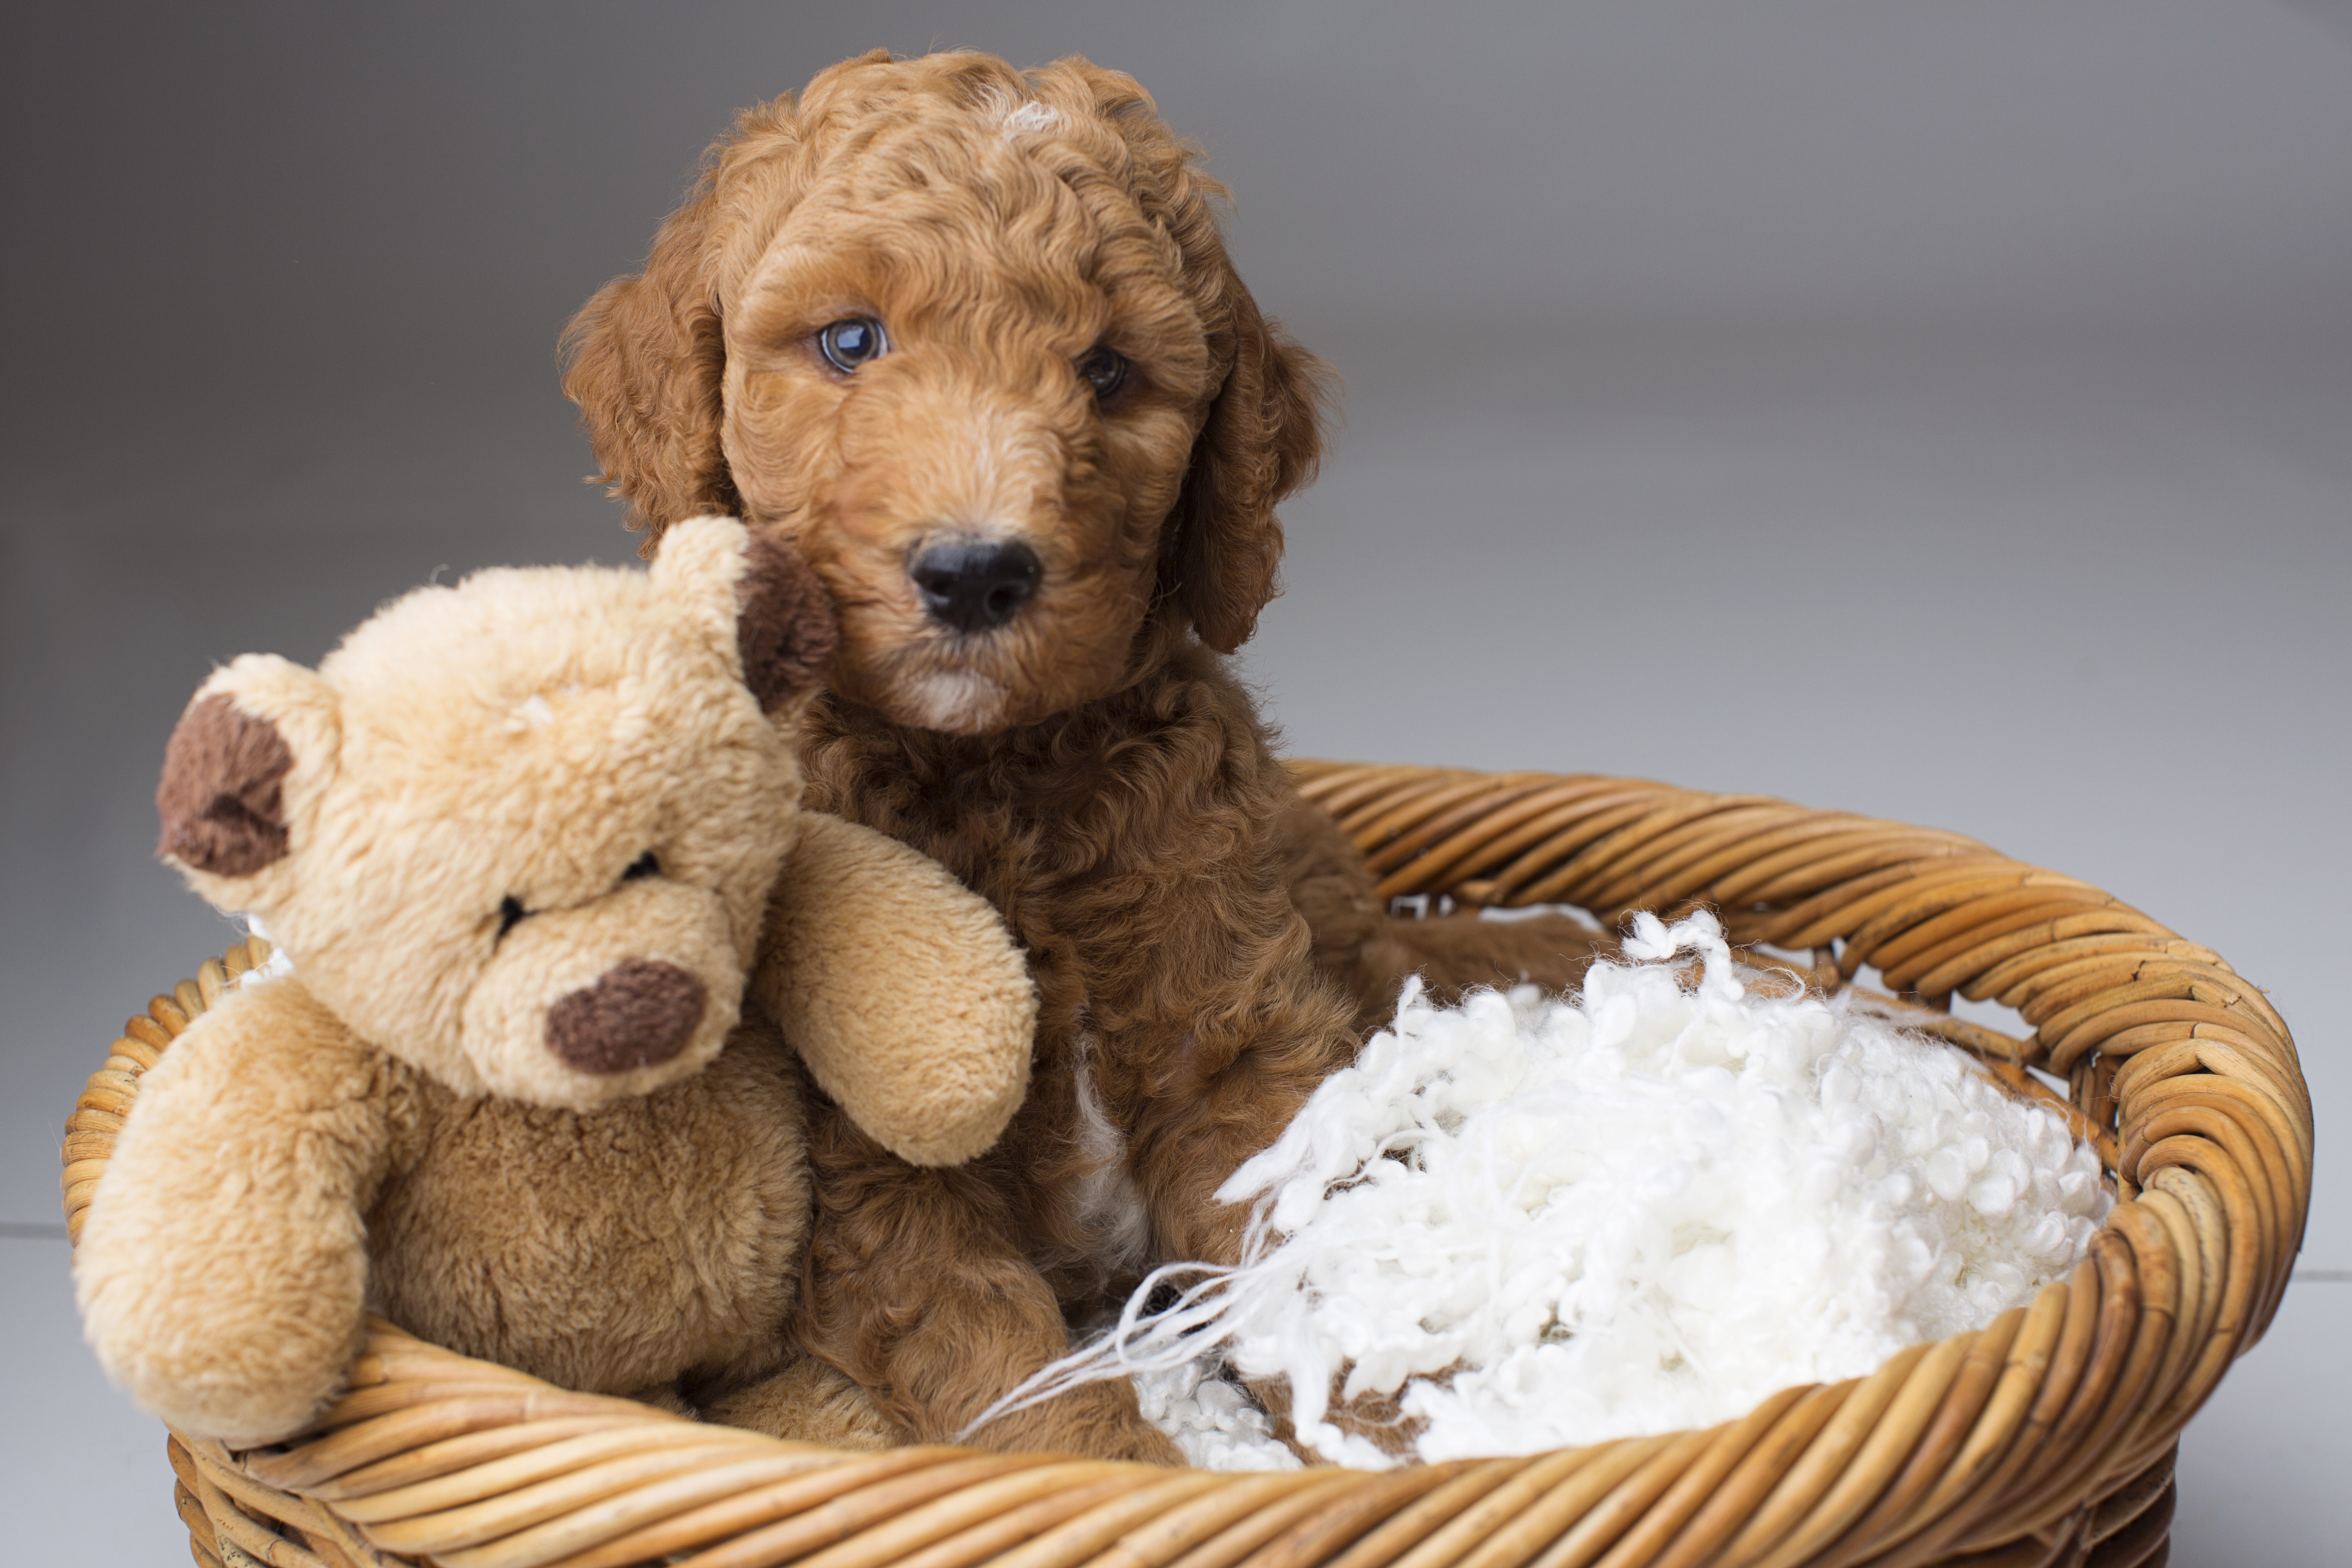 Goldendoodle Puppy with his Teddy Bear in a basket.